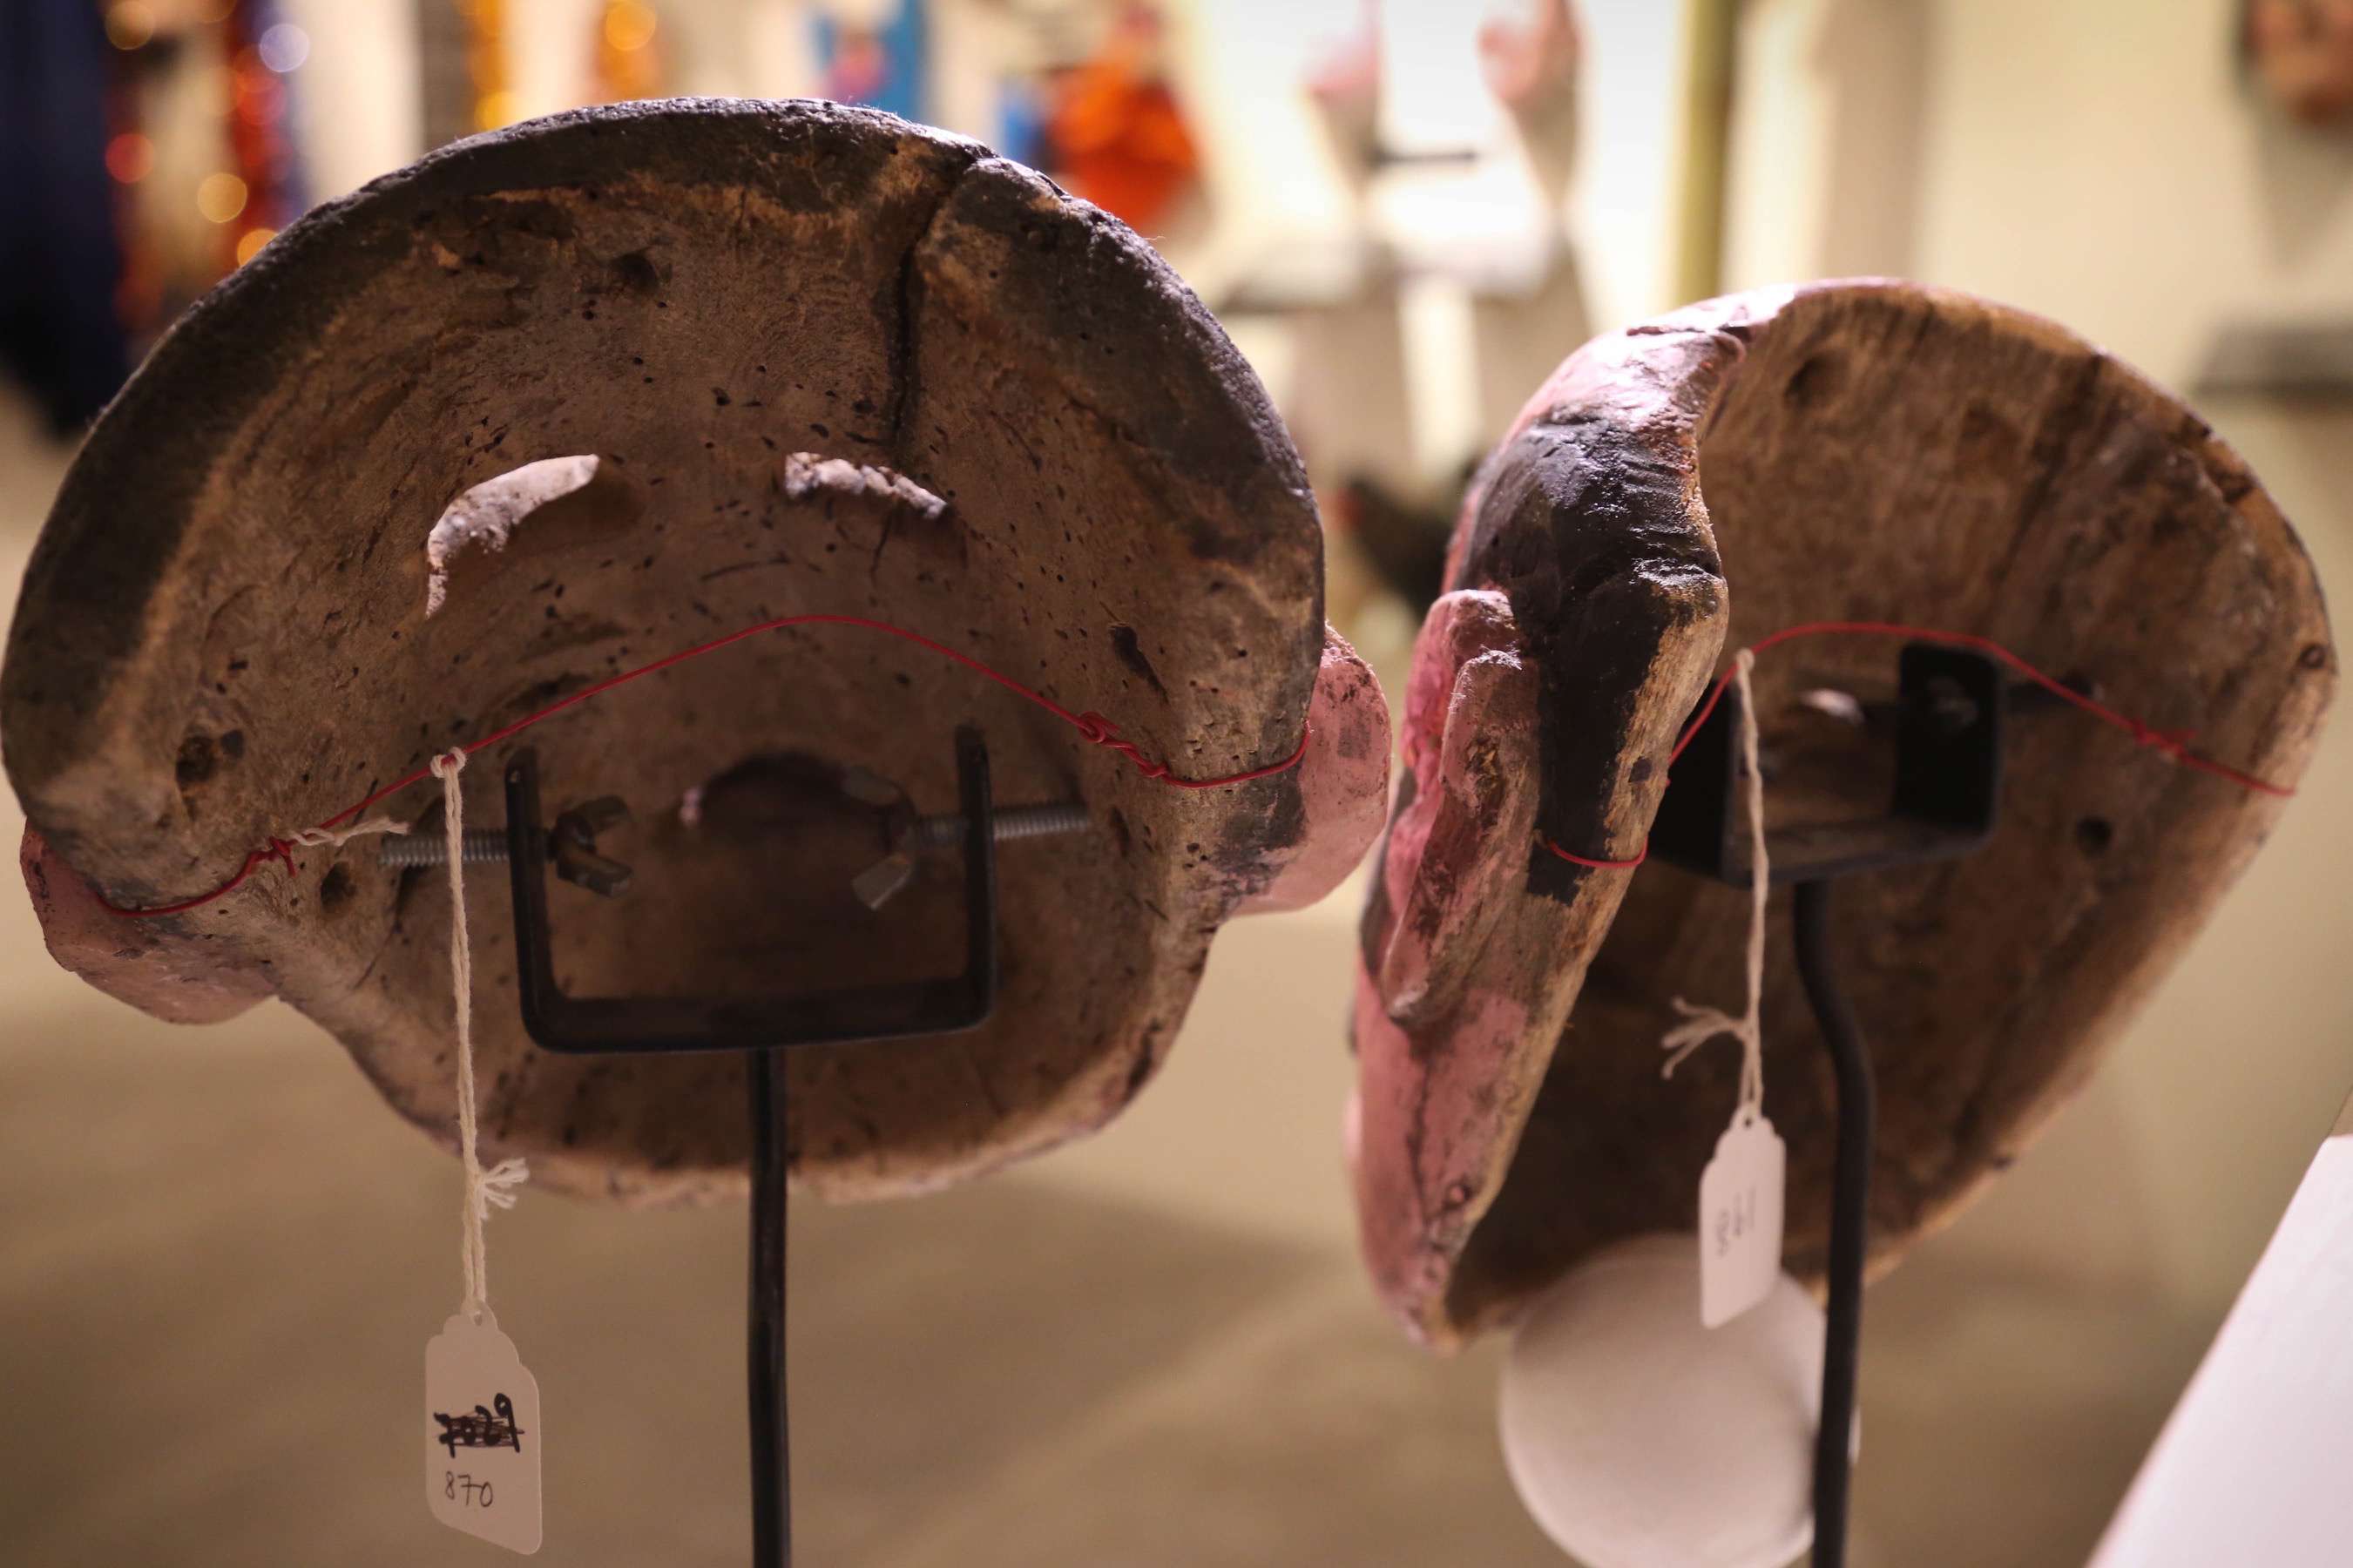 Older masks are carved from a single piece of wood and these two show the skill of the maker, due to the thinness of the mask, making it easier to wear for longer periods of time.